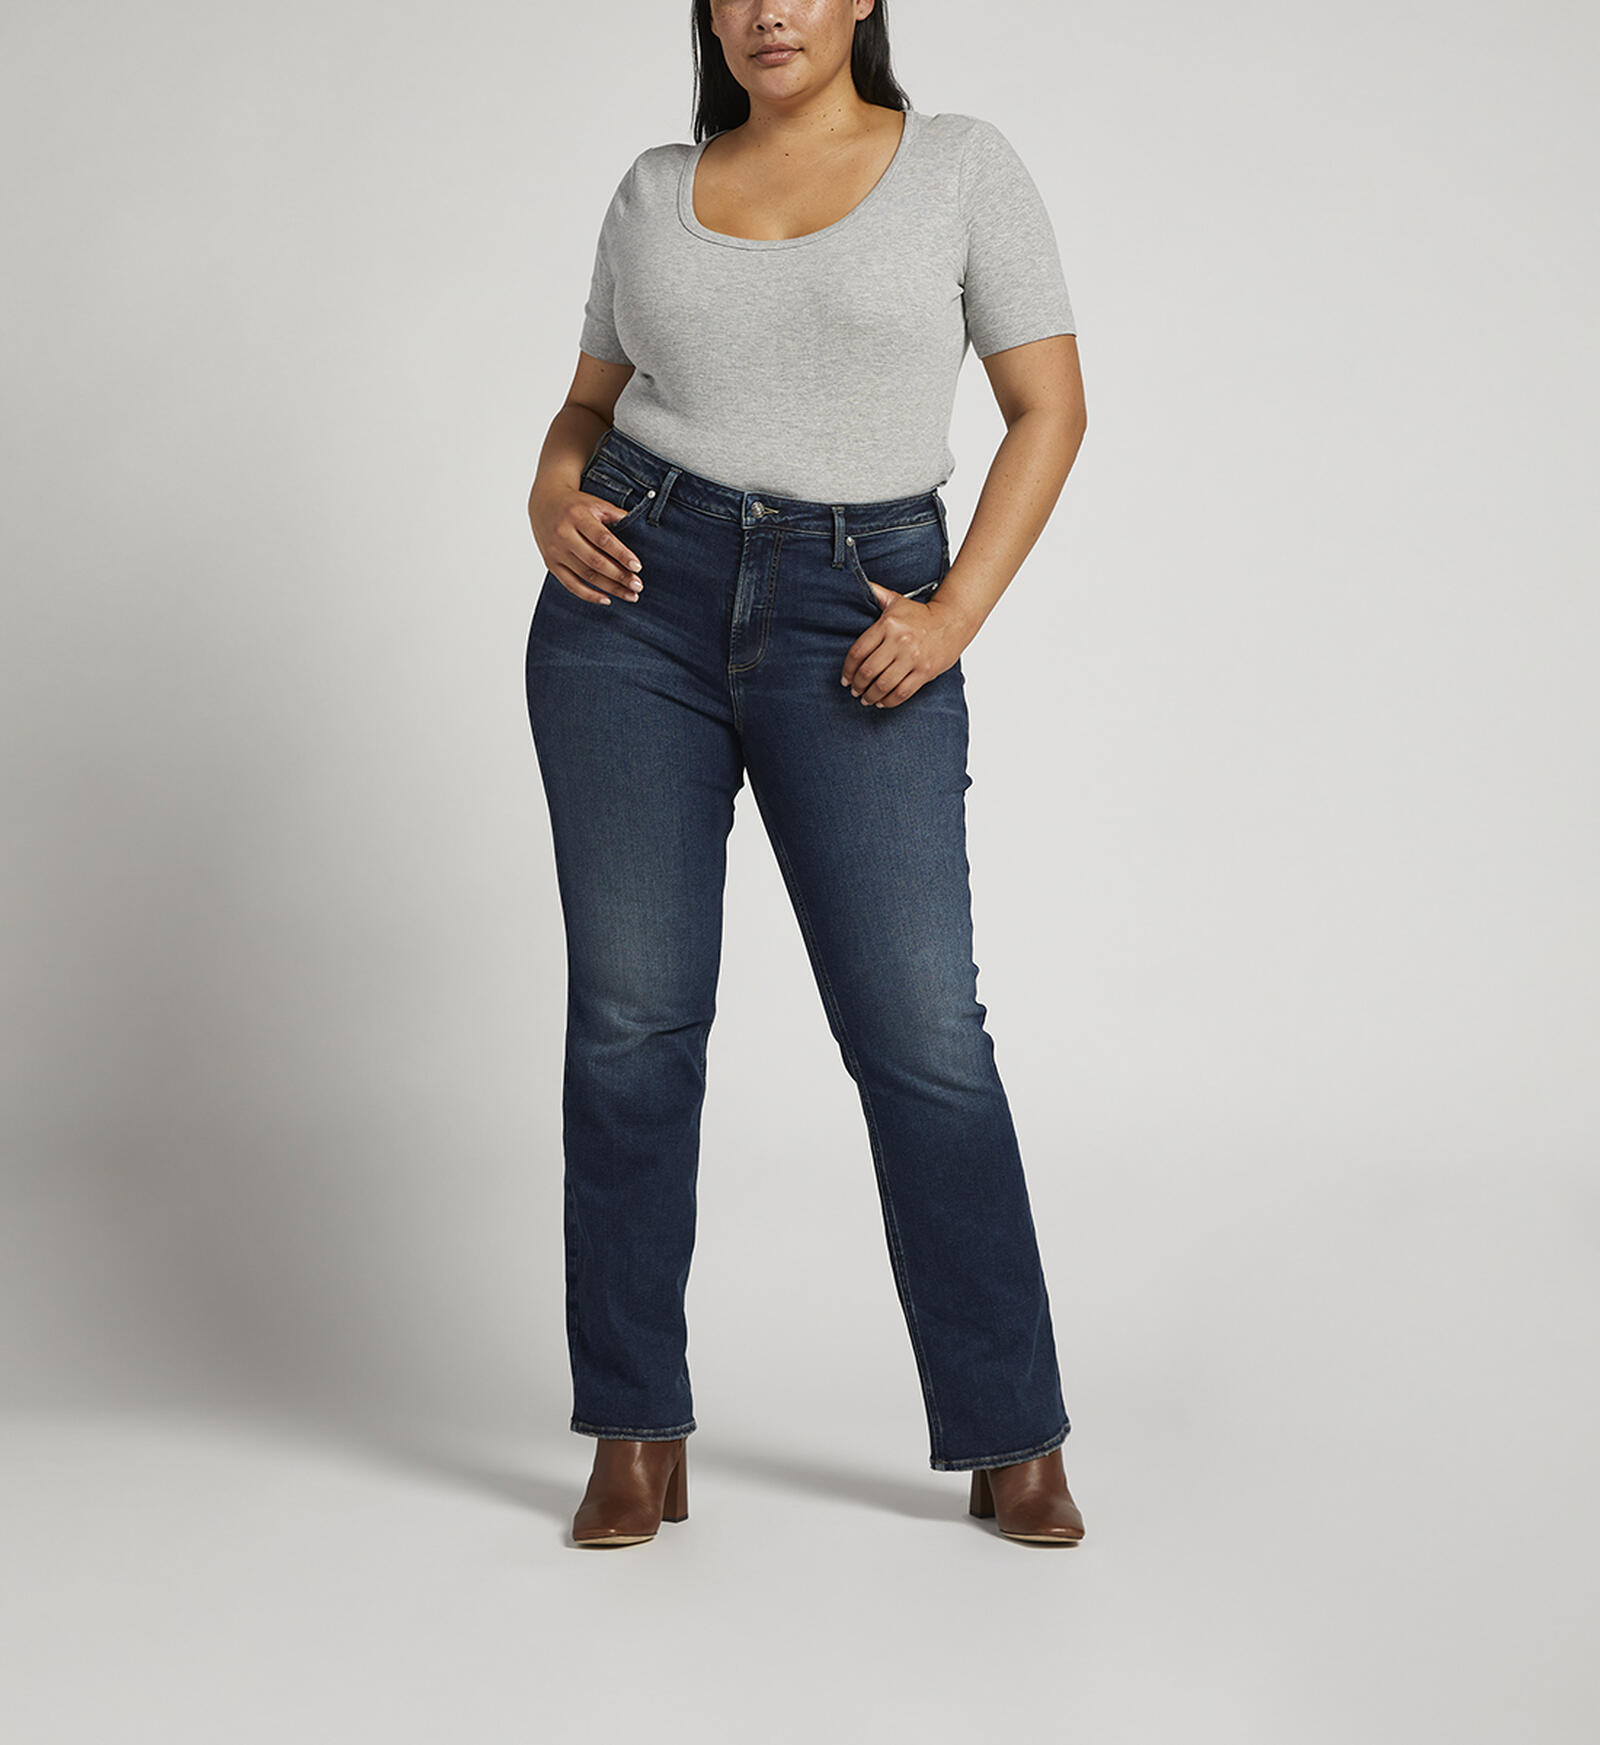 Buy Infinite Fit High Rise Bootcut Jeans Plus Size for USD 68.00